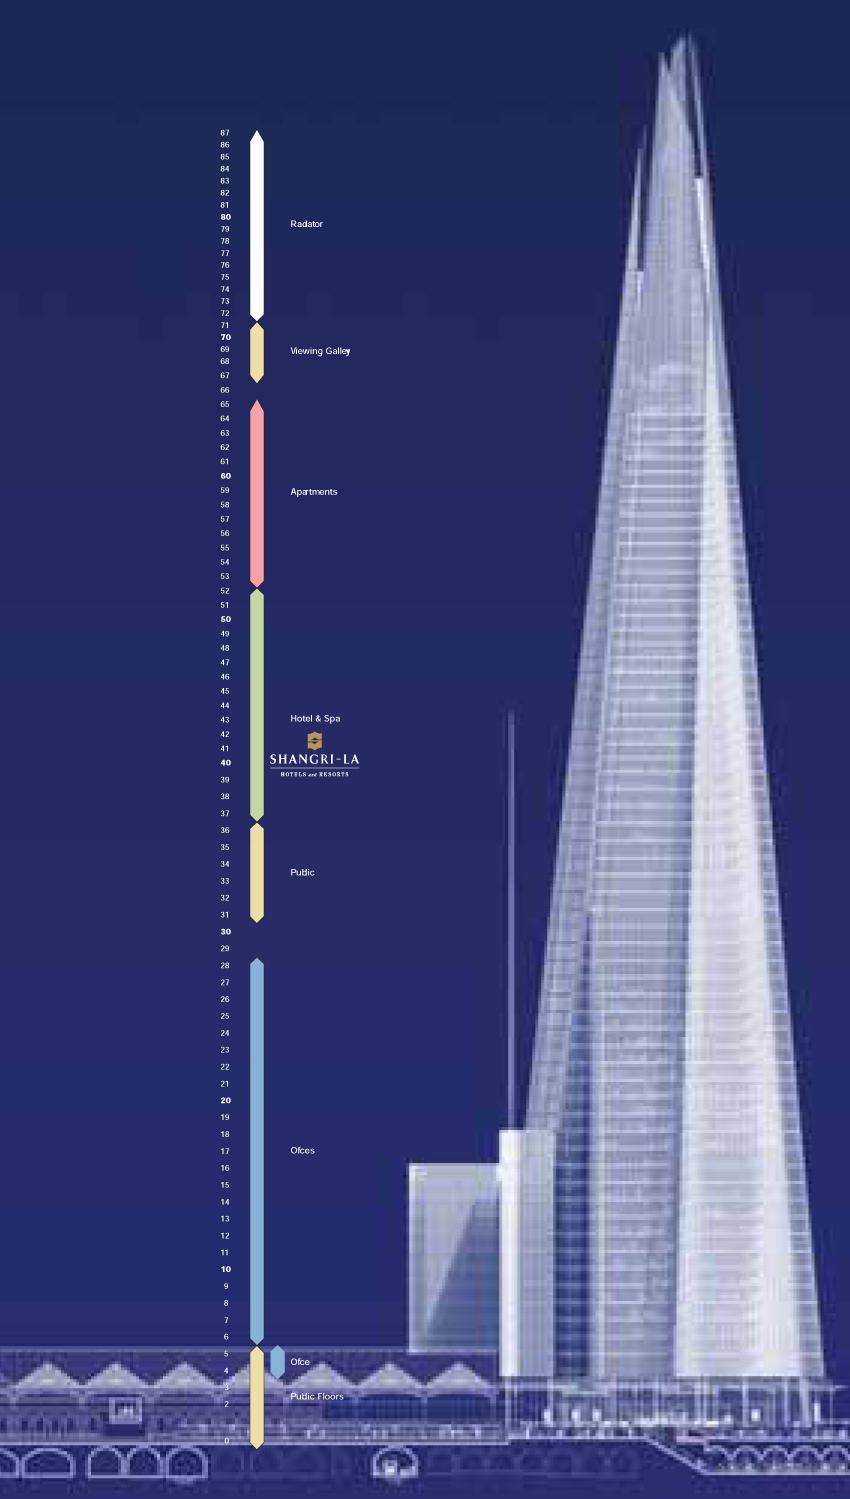 The Shard (Proposed Skyscraper Building At London Bridge): Computer Graphic Of Section Showing Mixed Usage